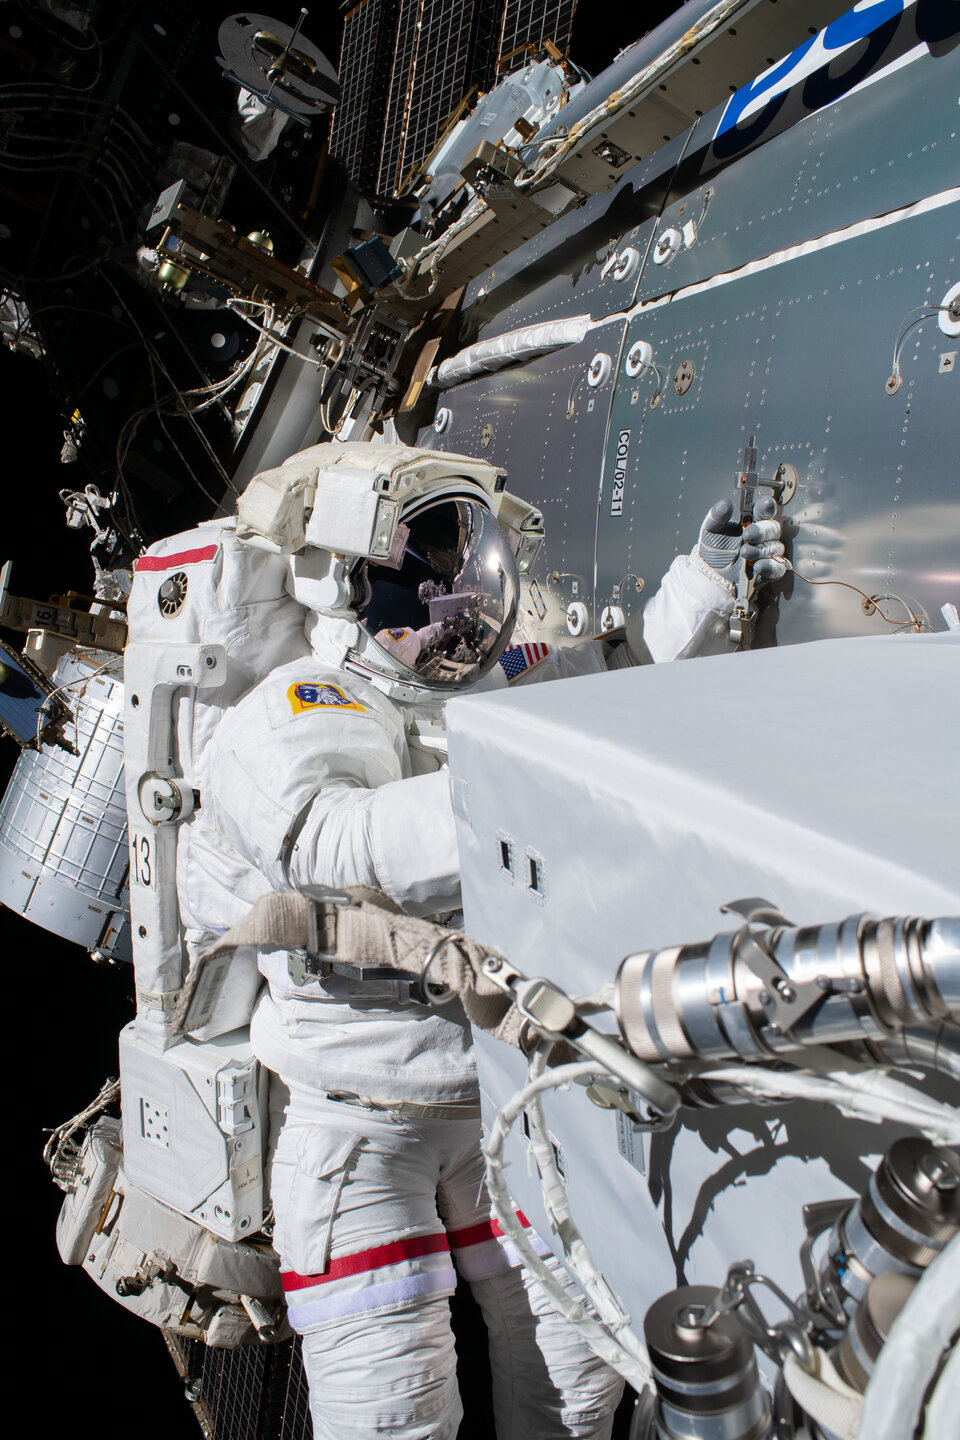 The Colka communications device was installed during a spacewalk